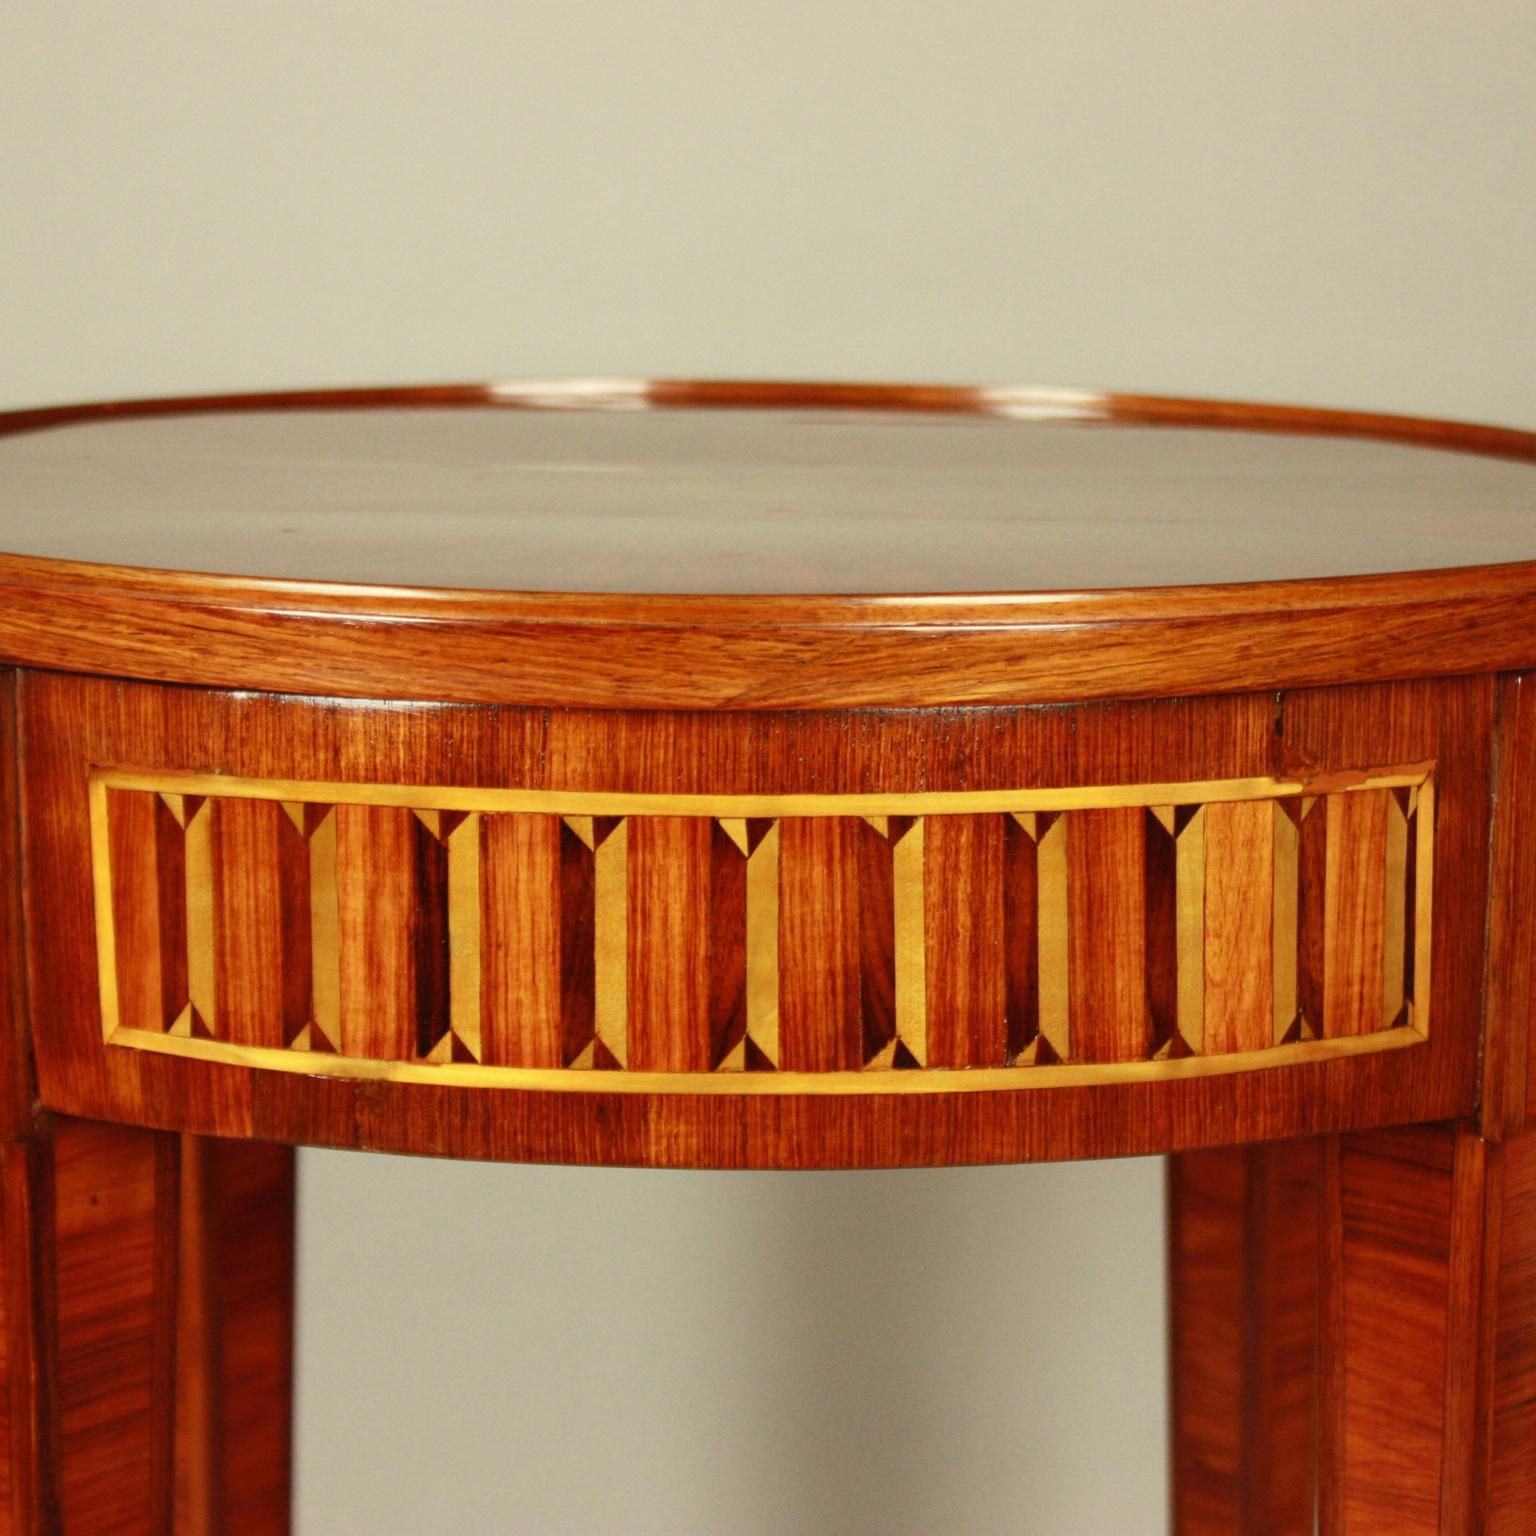 Napoleon III Small French 19th Century Louis XVI Style Marquetry Side Table or Gueridon